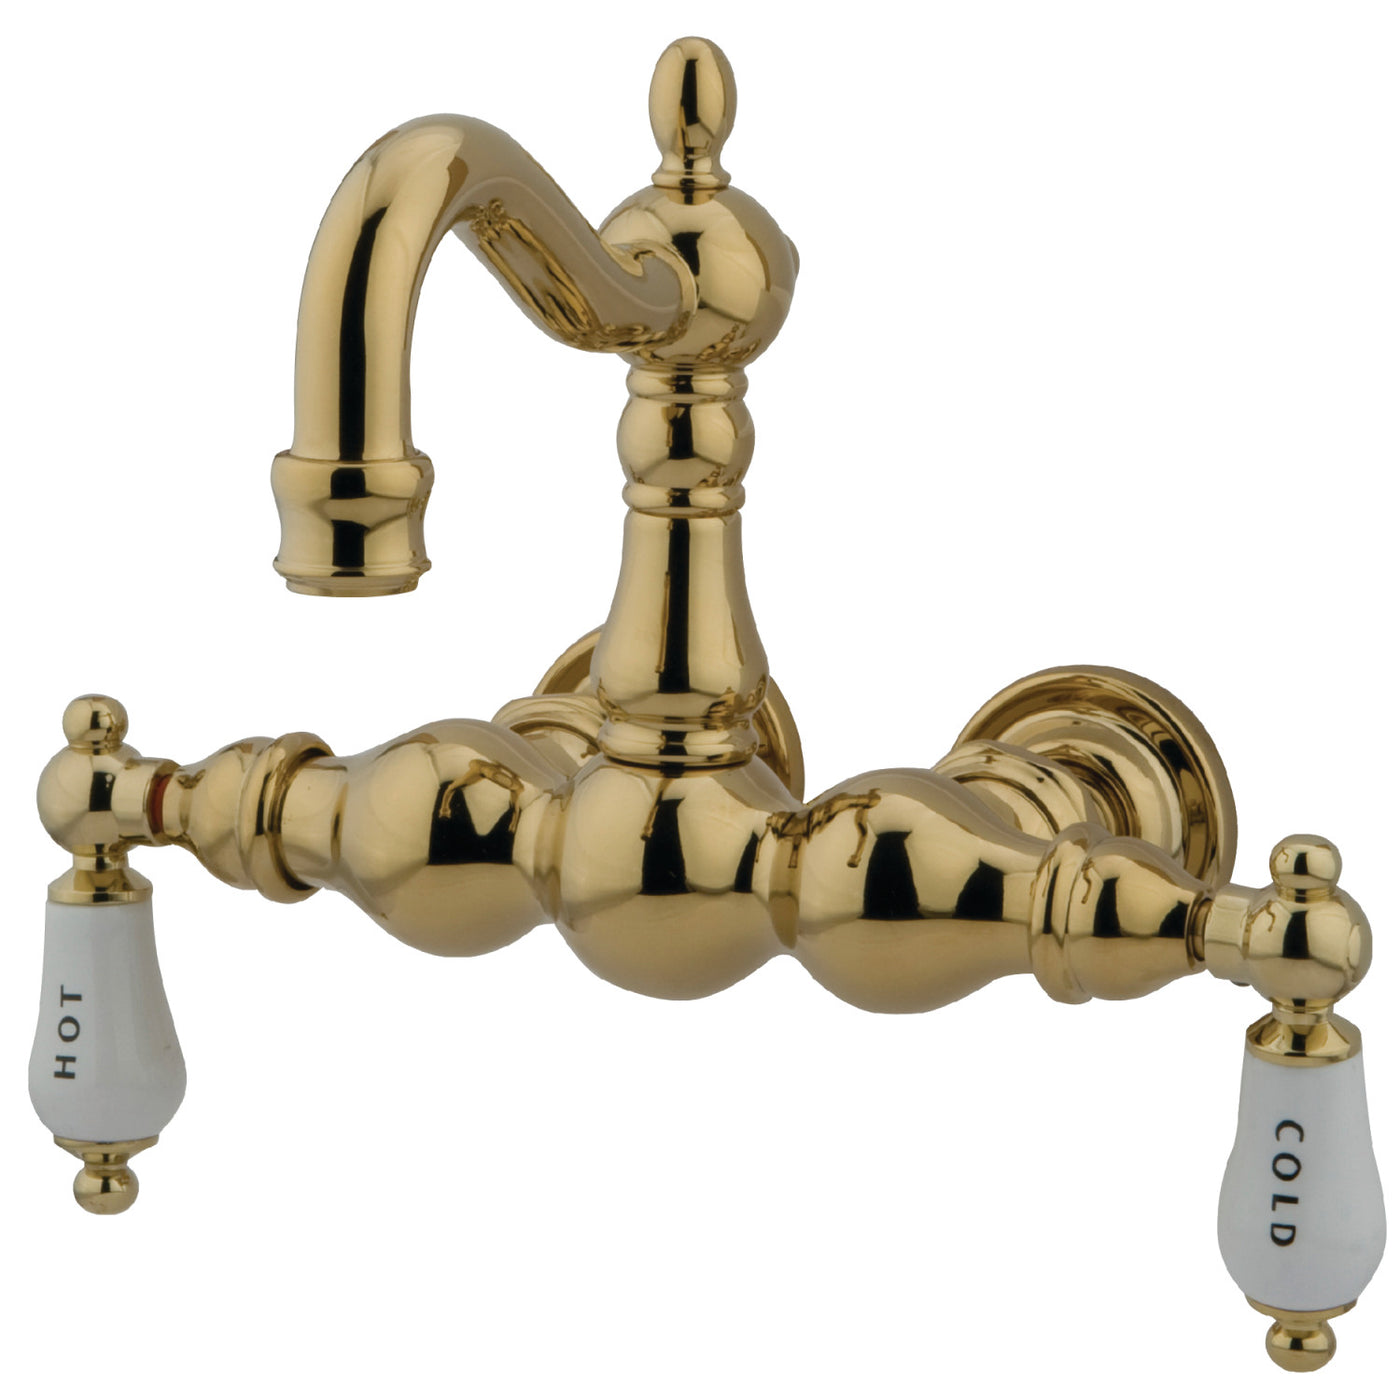 Elements of Design DT10012CL 3-3/8-Inch Wall Mount Tub Faucet, Polished Brass